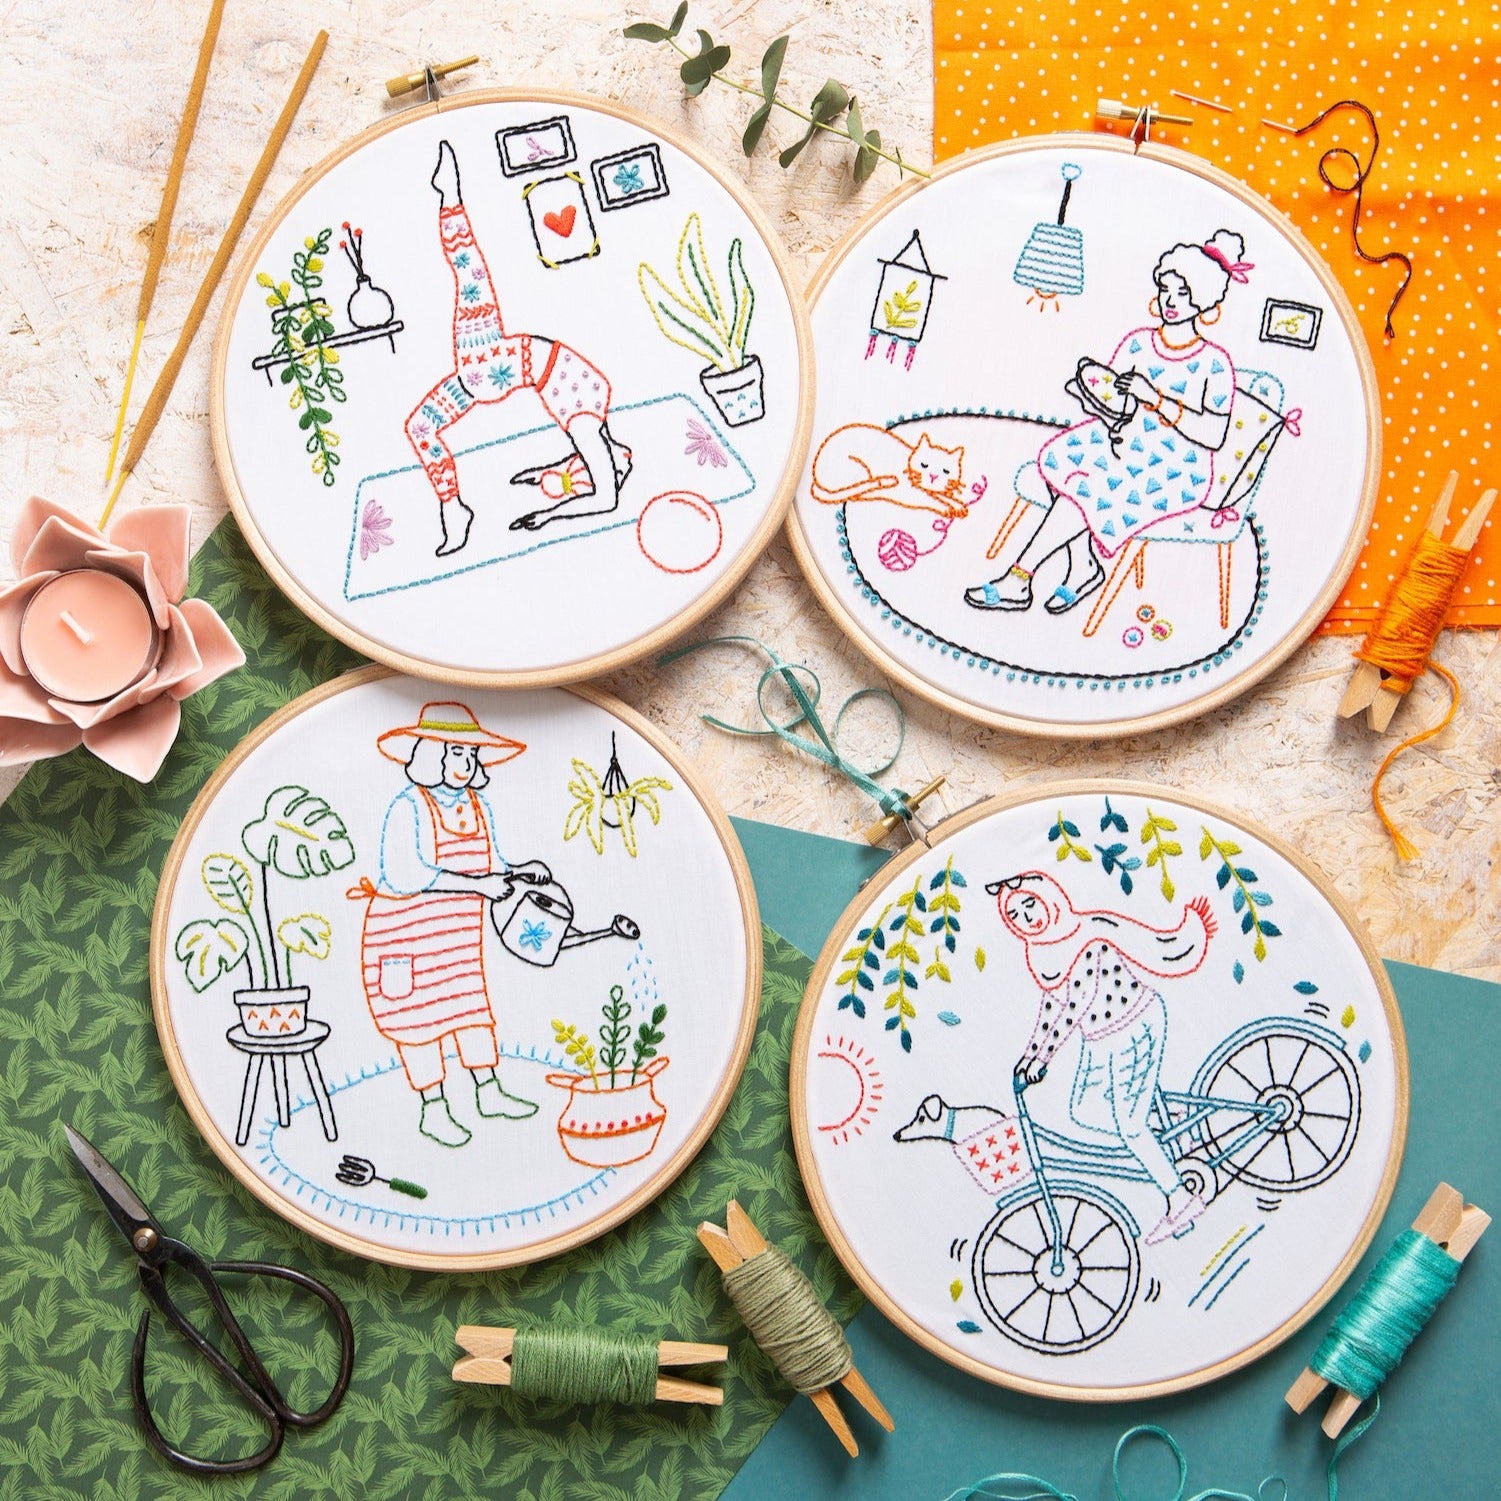 Frost Buddy – Sew Much Fun Embroidery